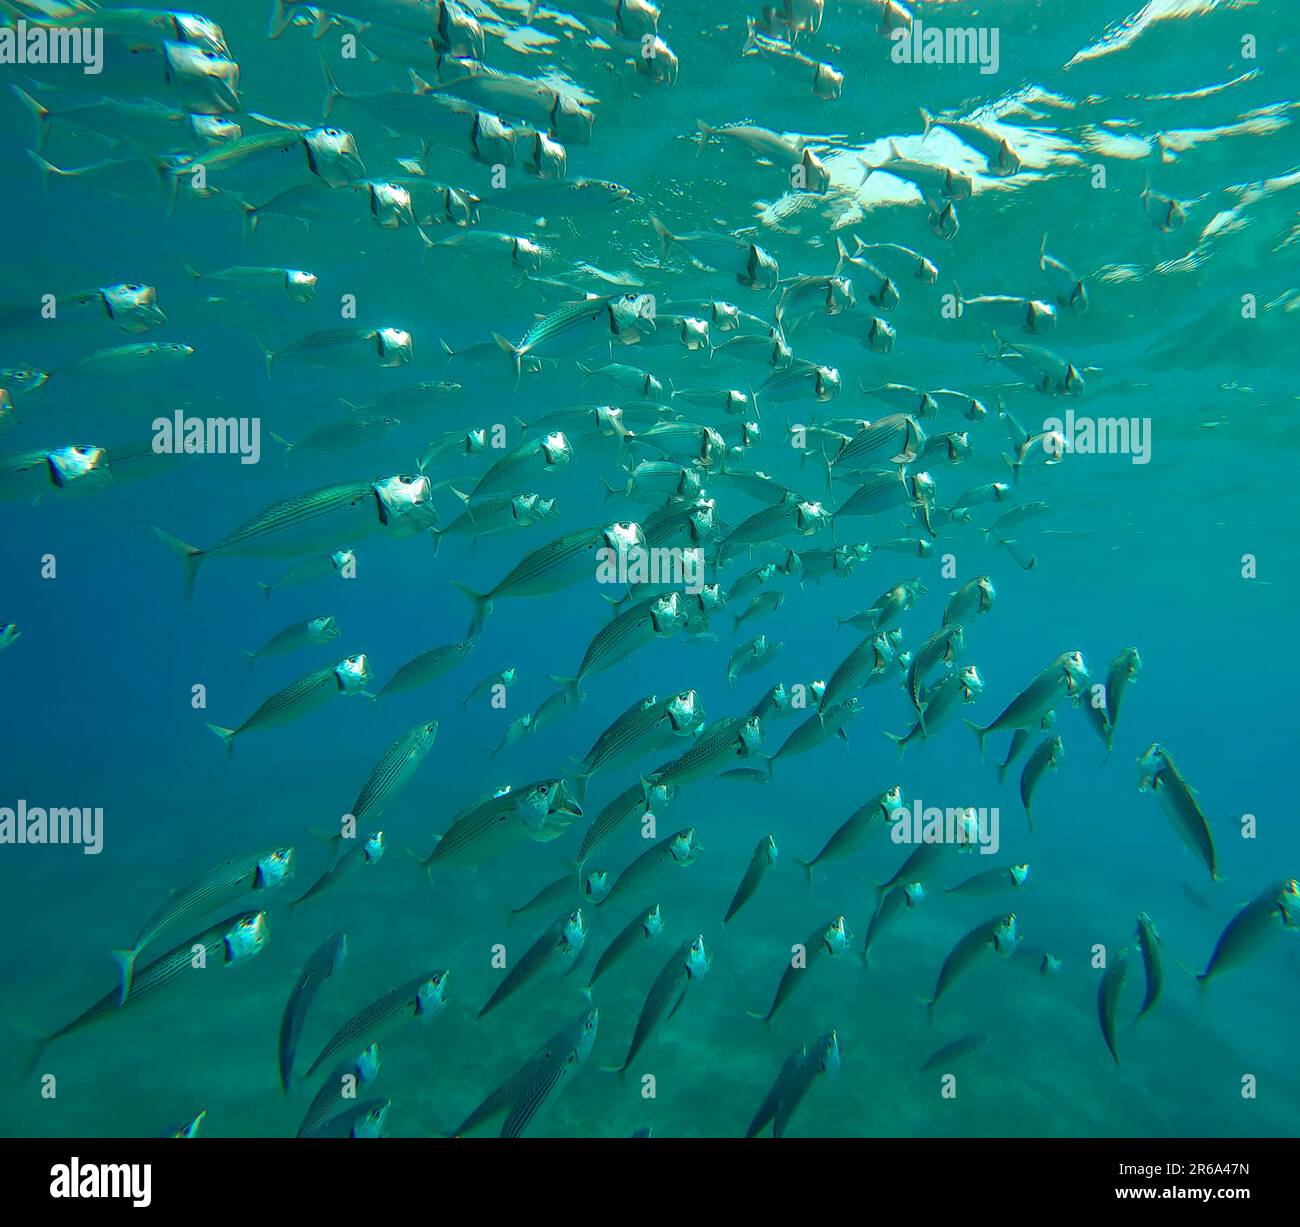 Shoal of Striped Mackerel or Indian Nackerel (Rastrelliger kanagurta) swims in blue water with open mouths filtering for plankton on sunny day sparkli Stock Photo